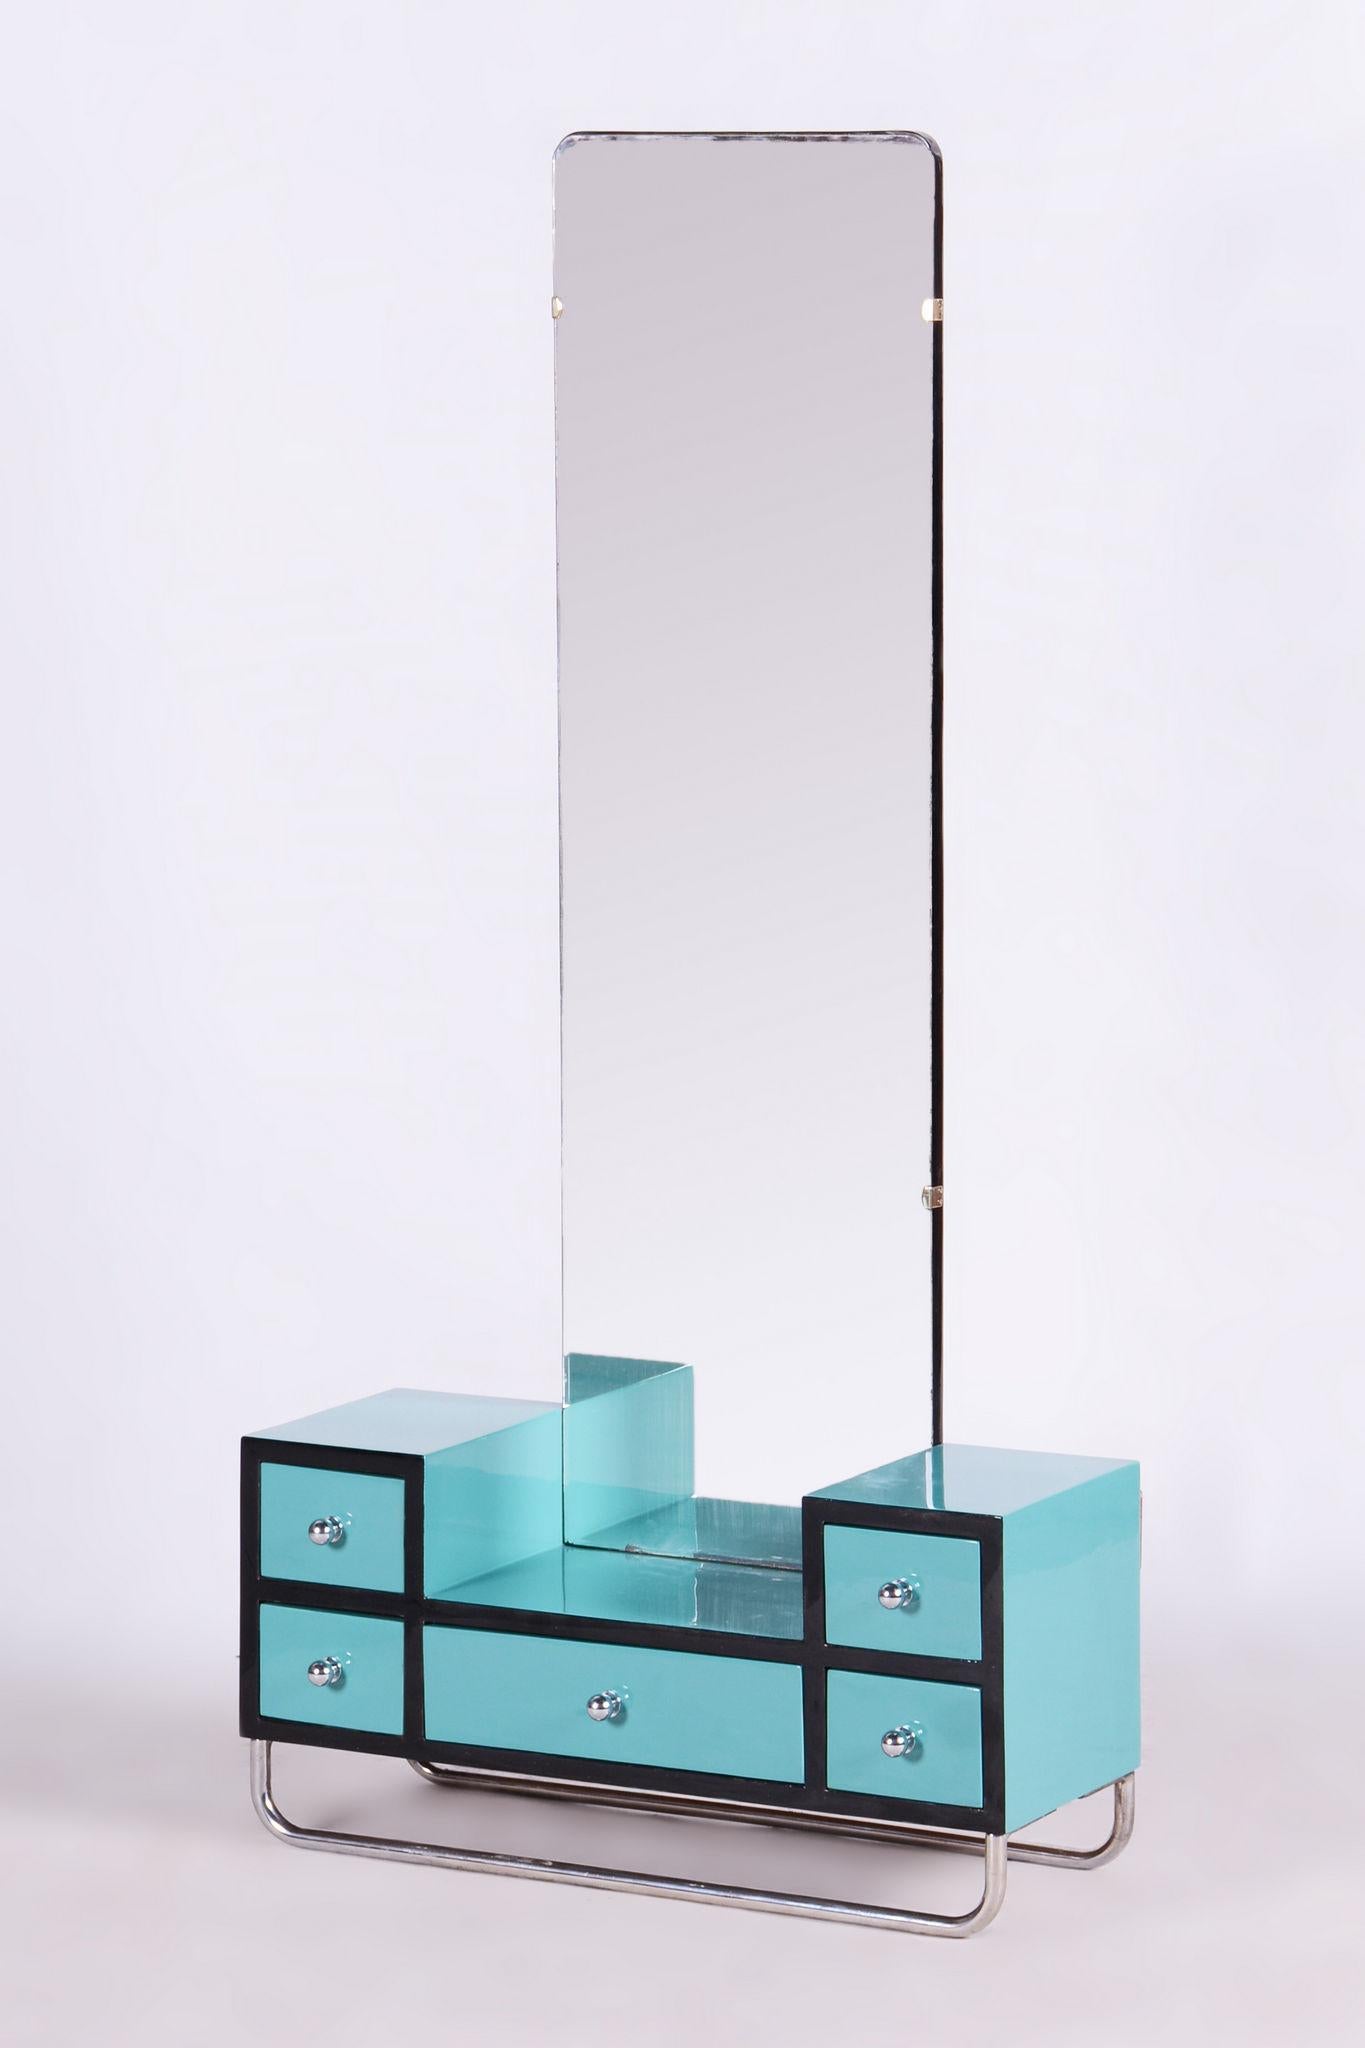 Restored Bauhaus Dressing Mirror, Chrome, Steel, Lacquered Wood, Czechia, 1930s For Sale 4